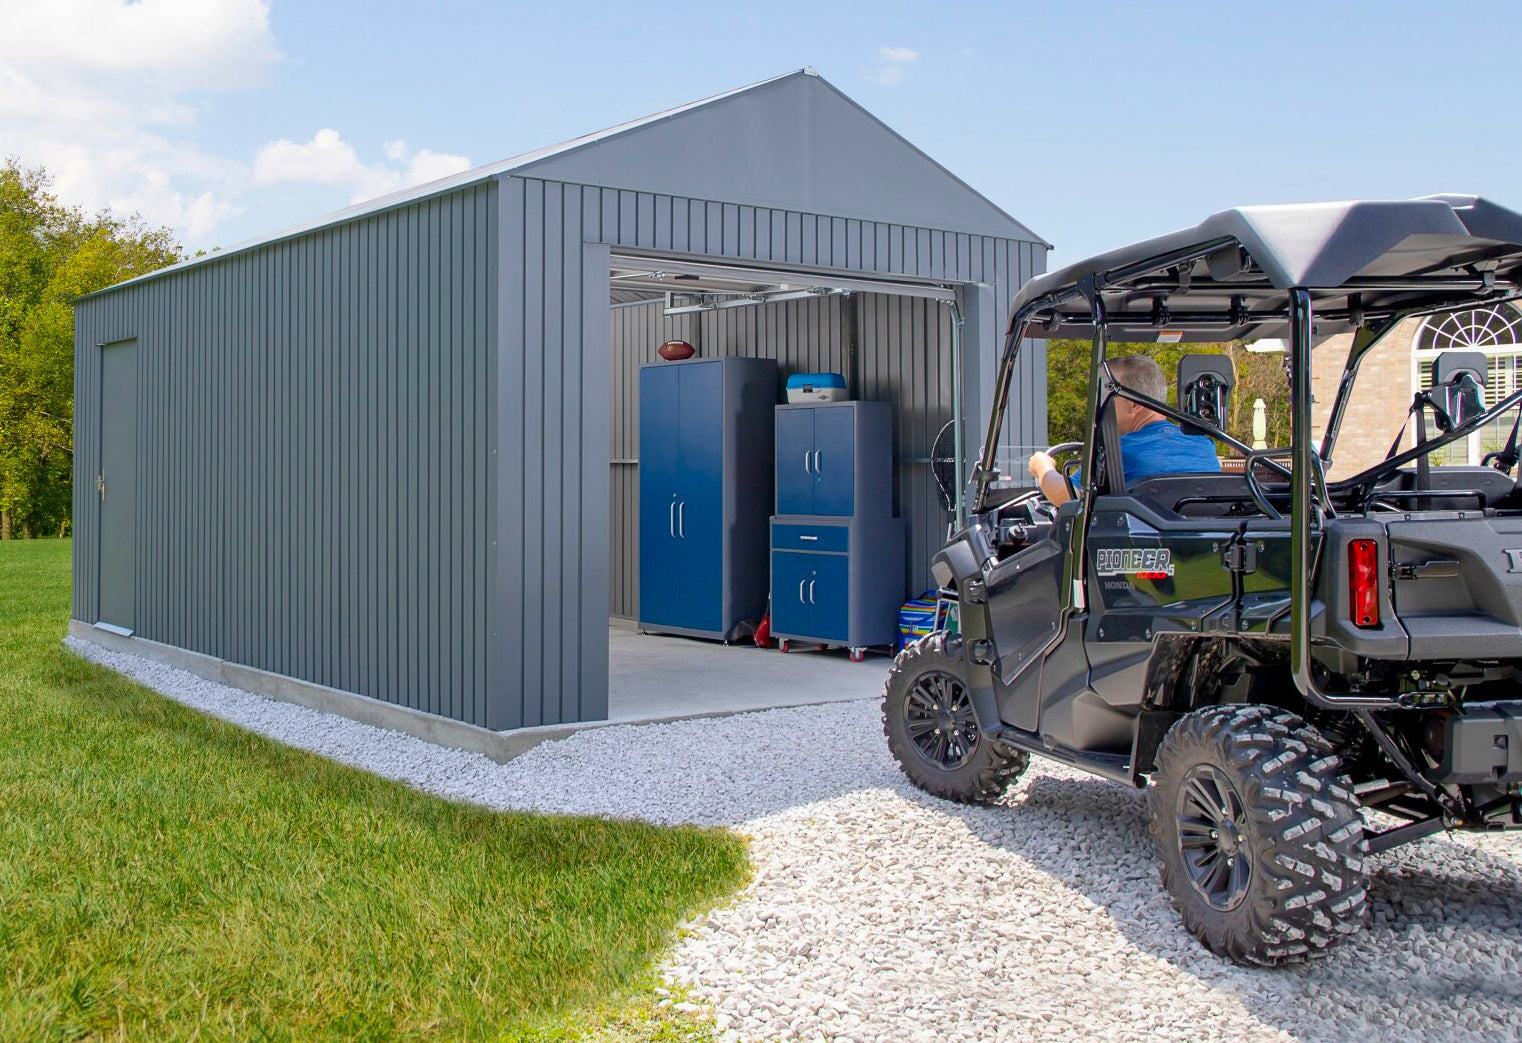 detached garage with roll up door and side entry swing door and atv parking inside